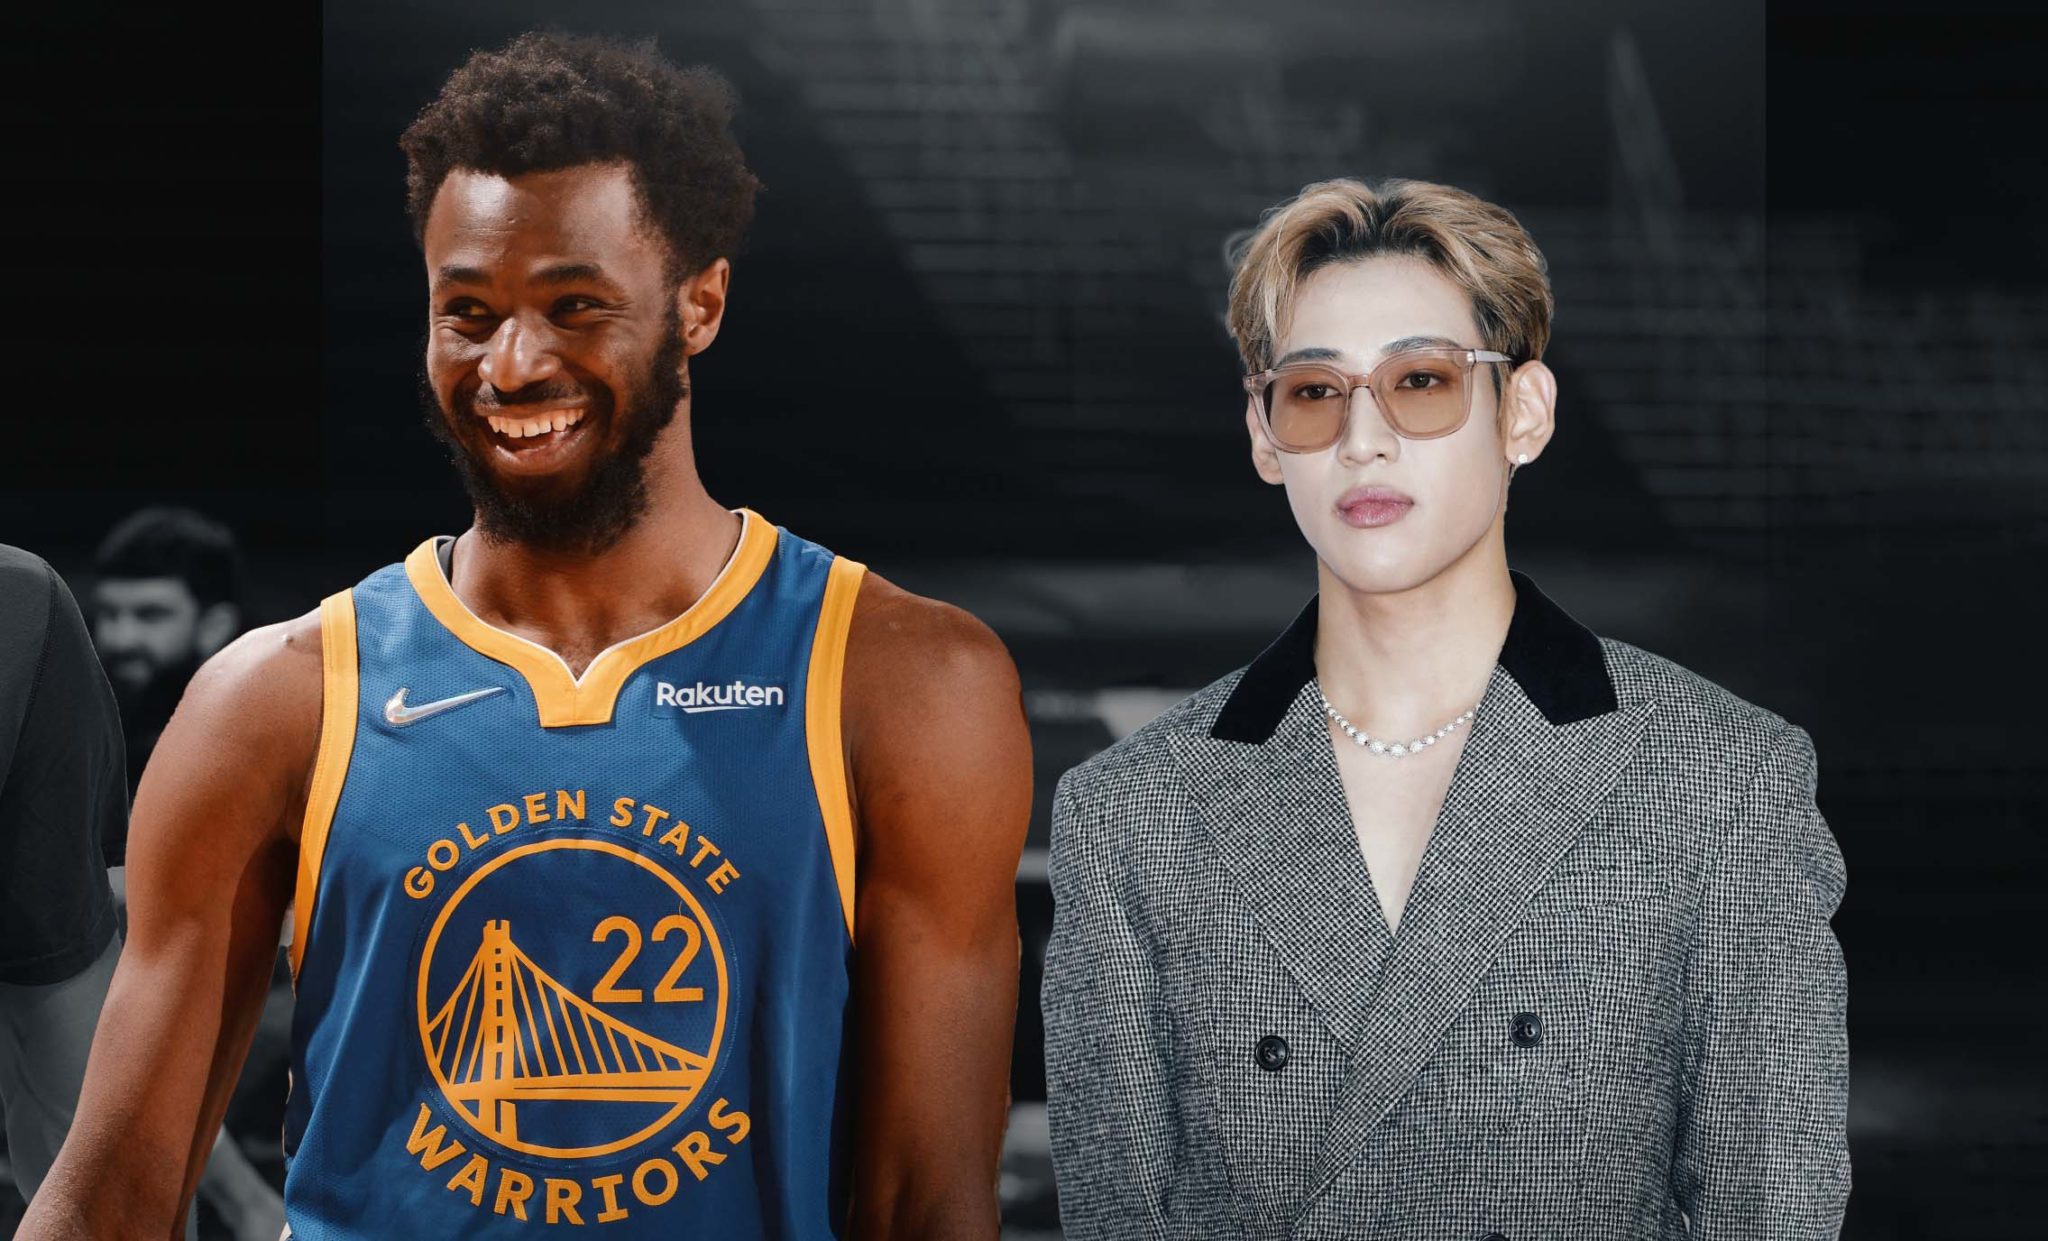 K-Pop singer interfered with All-Star vote to make Andrew Wiggins